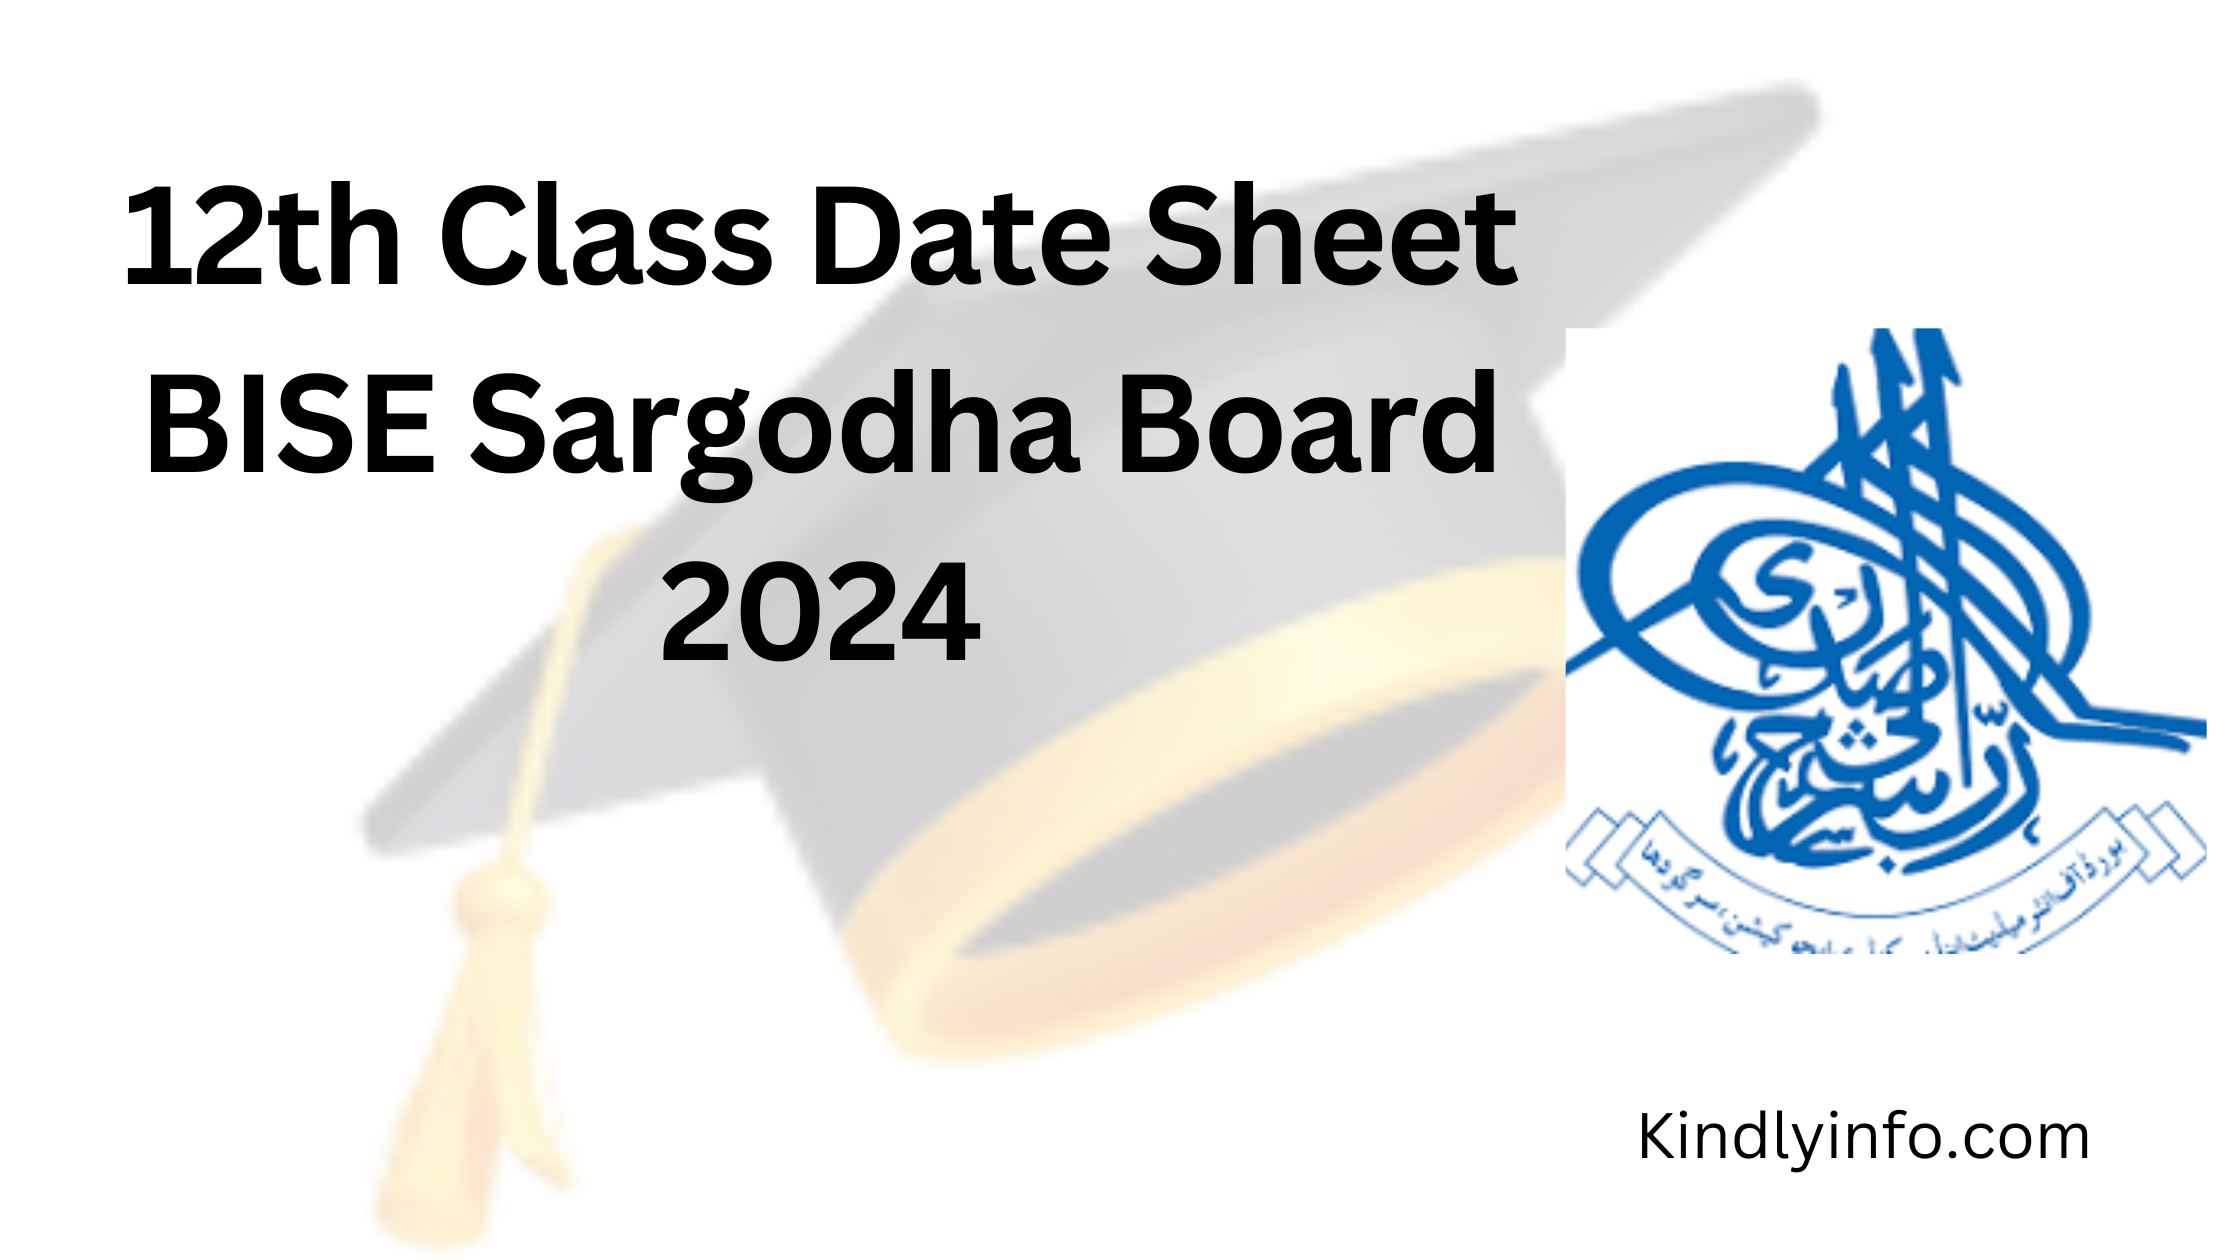 12th Class 2nd Year Date Sheet BISE Sargodha Board 2024. Date Sheet 2024 has been announced and the exams will start from 20 May 2024.